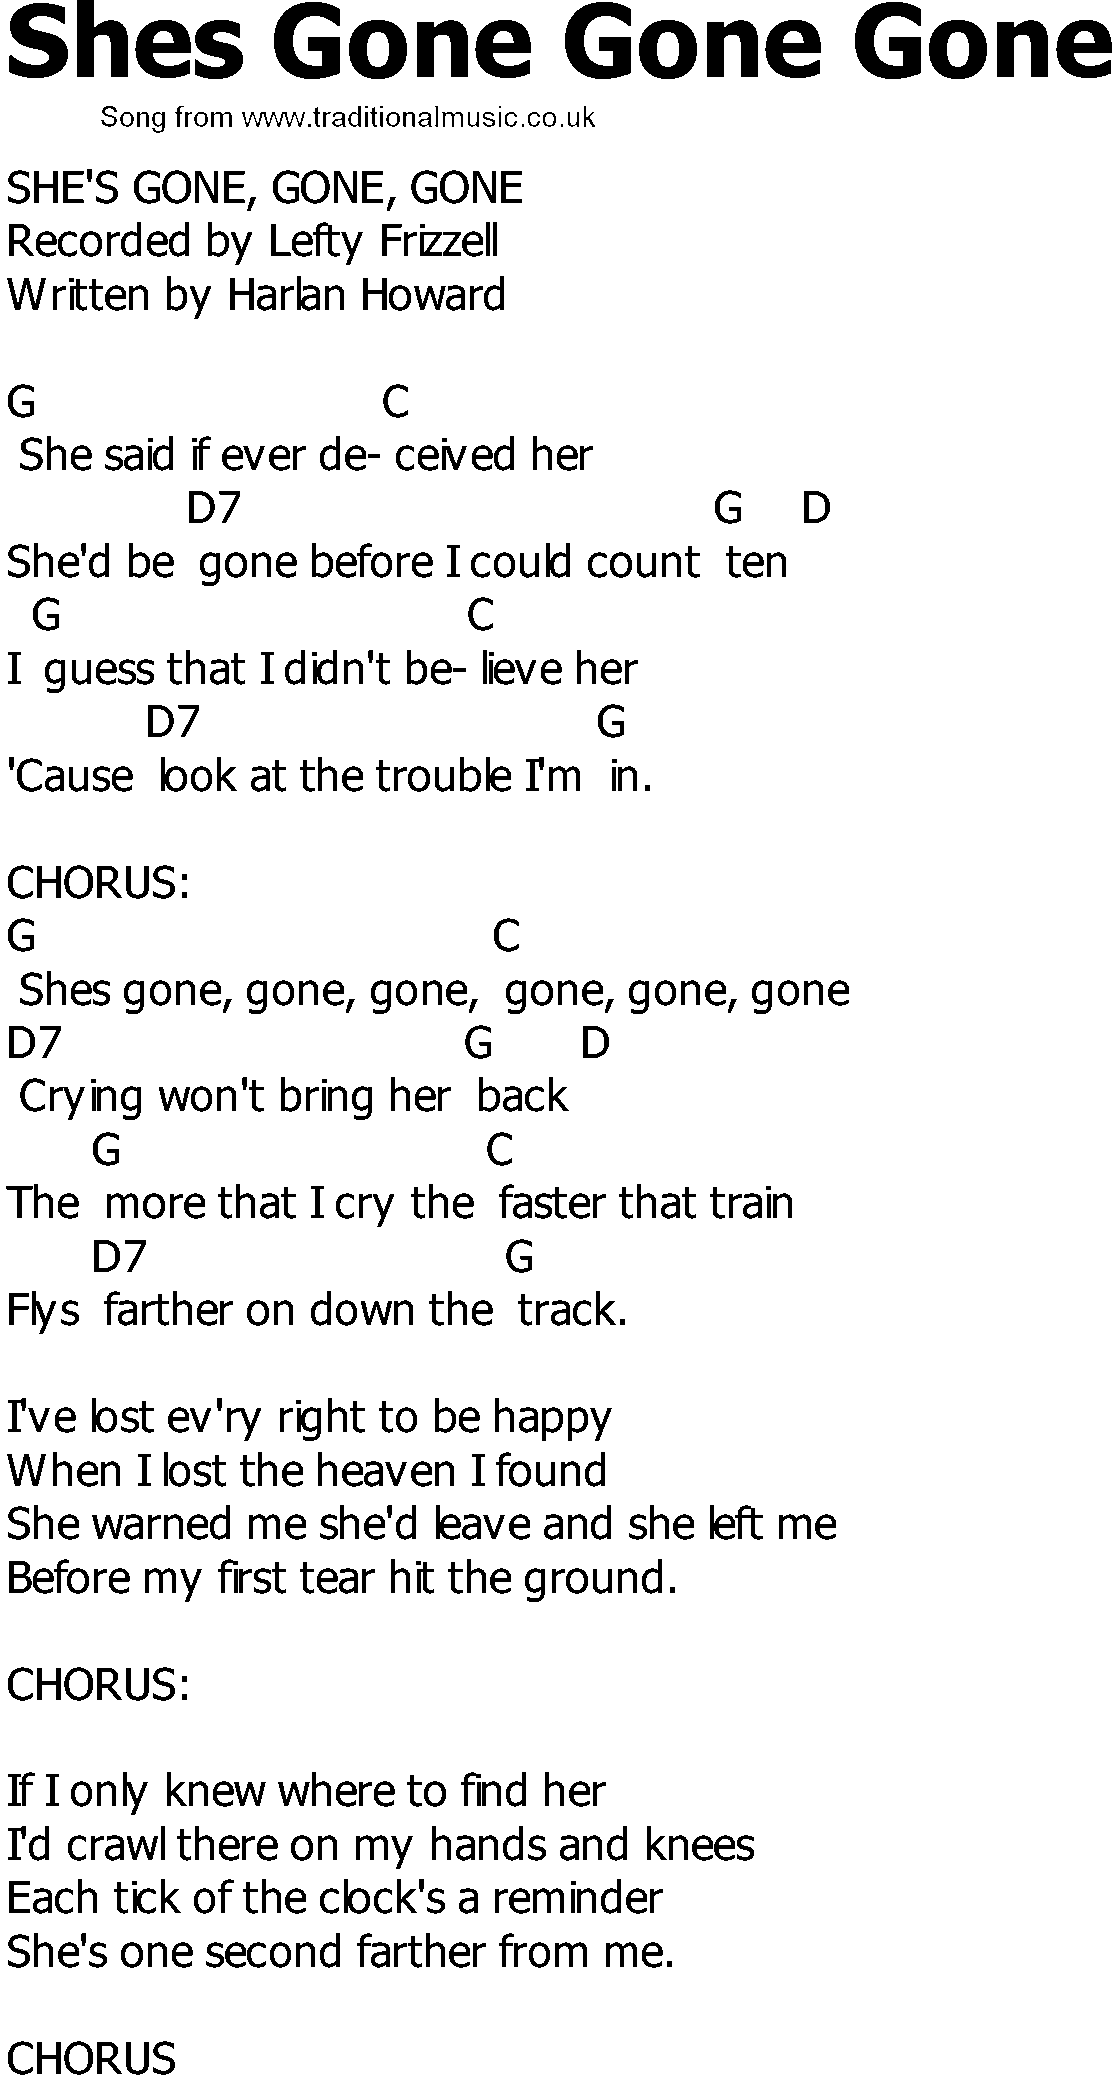 Old Country song lyrics with chords - Shes Gone Gone Gone